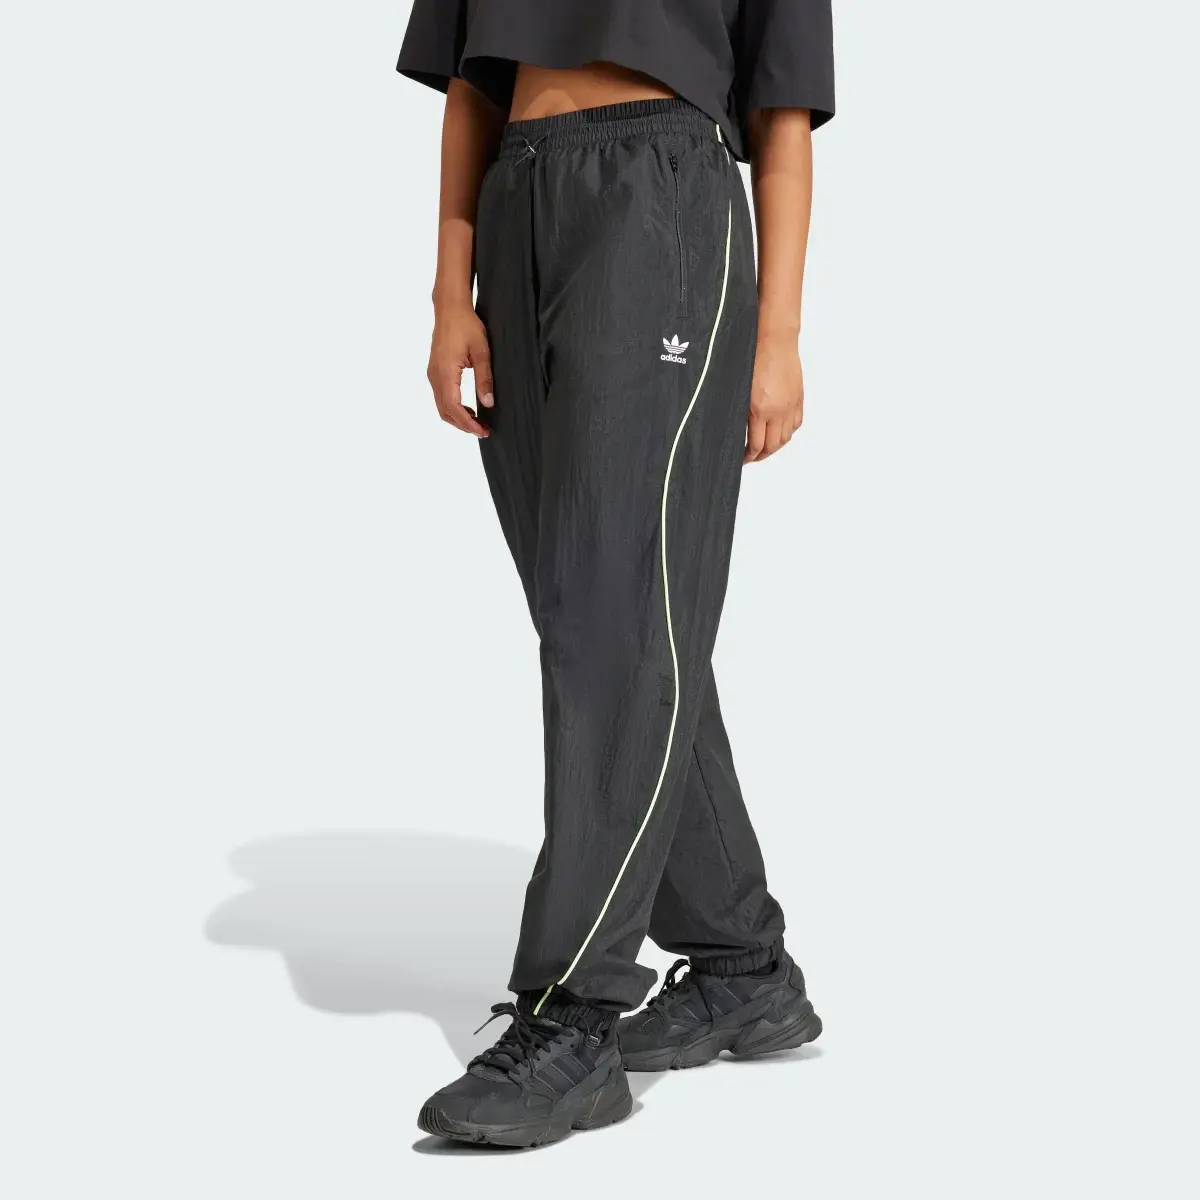 Adidas Loose Parachute Trousers. 1